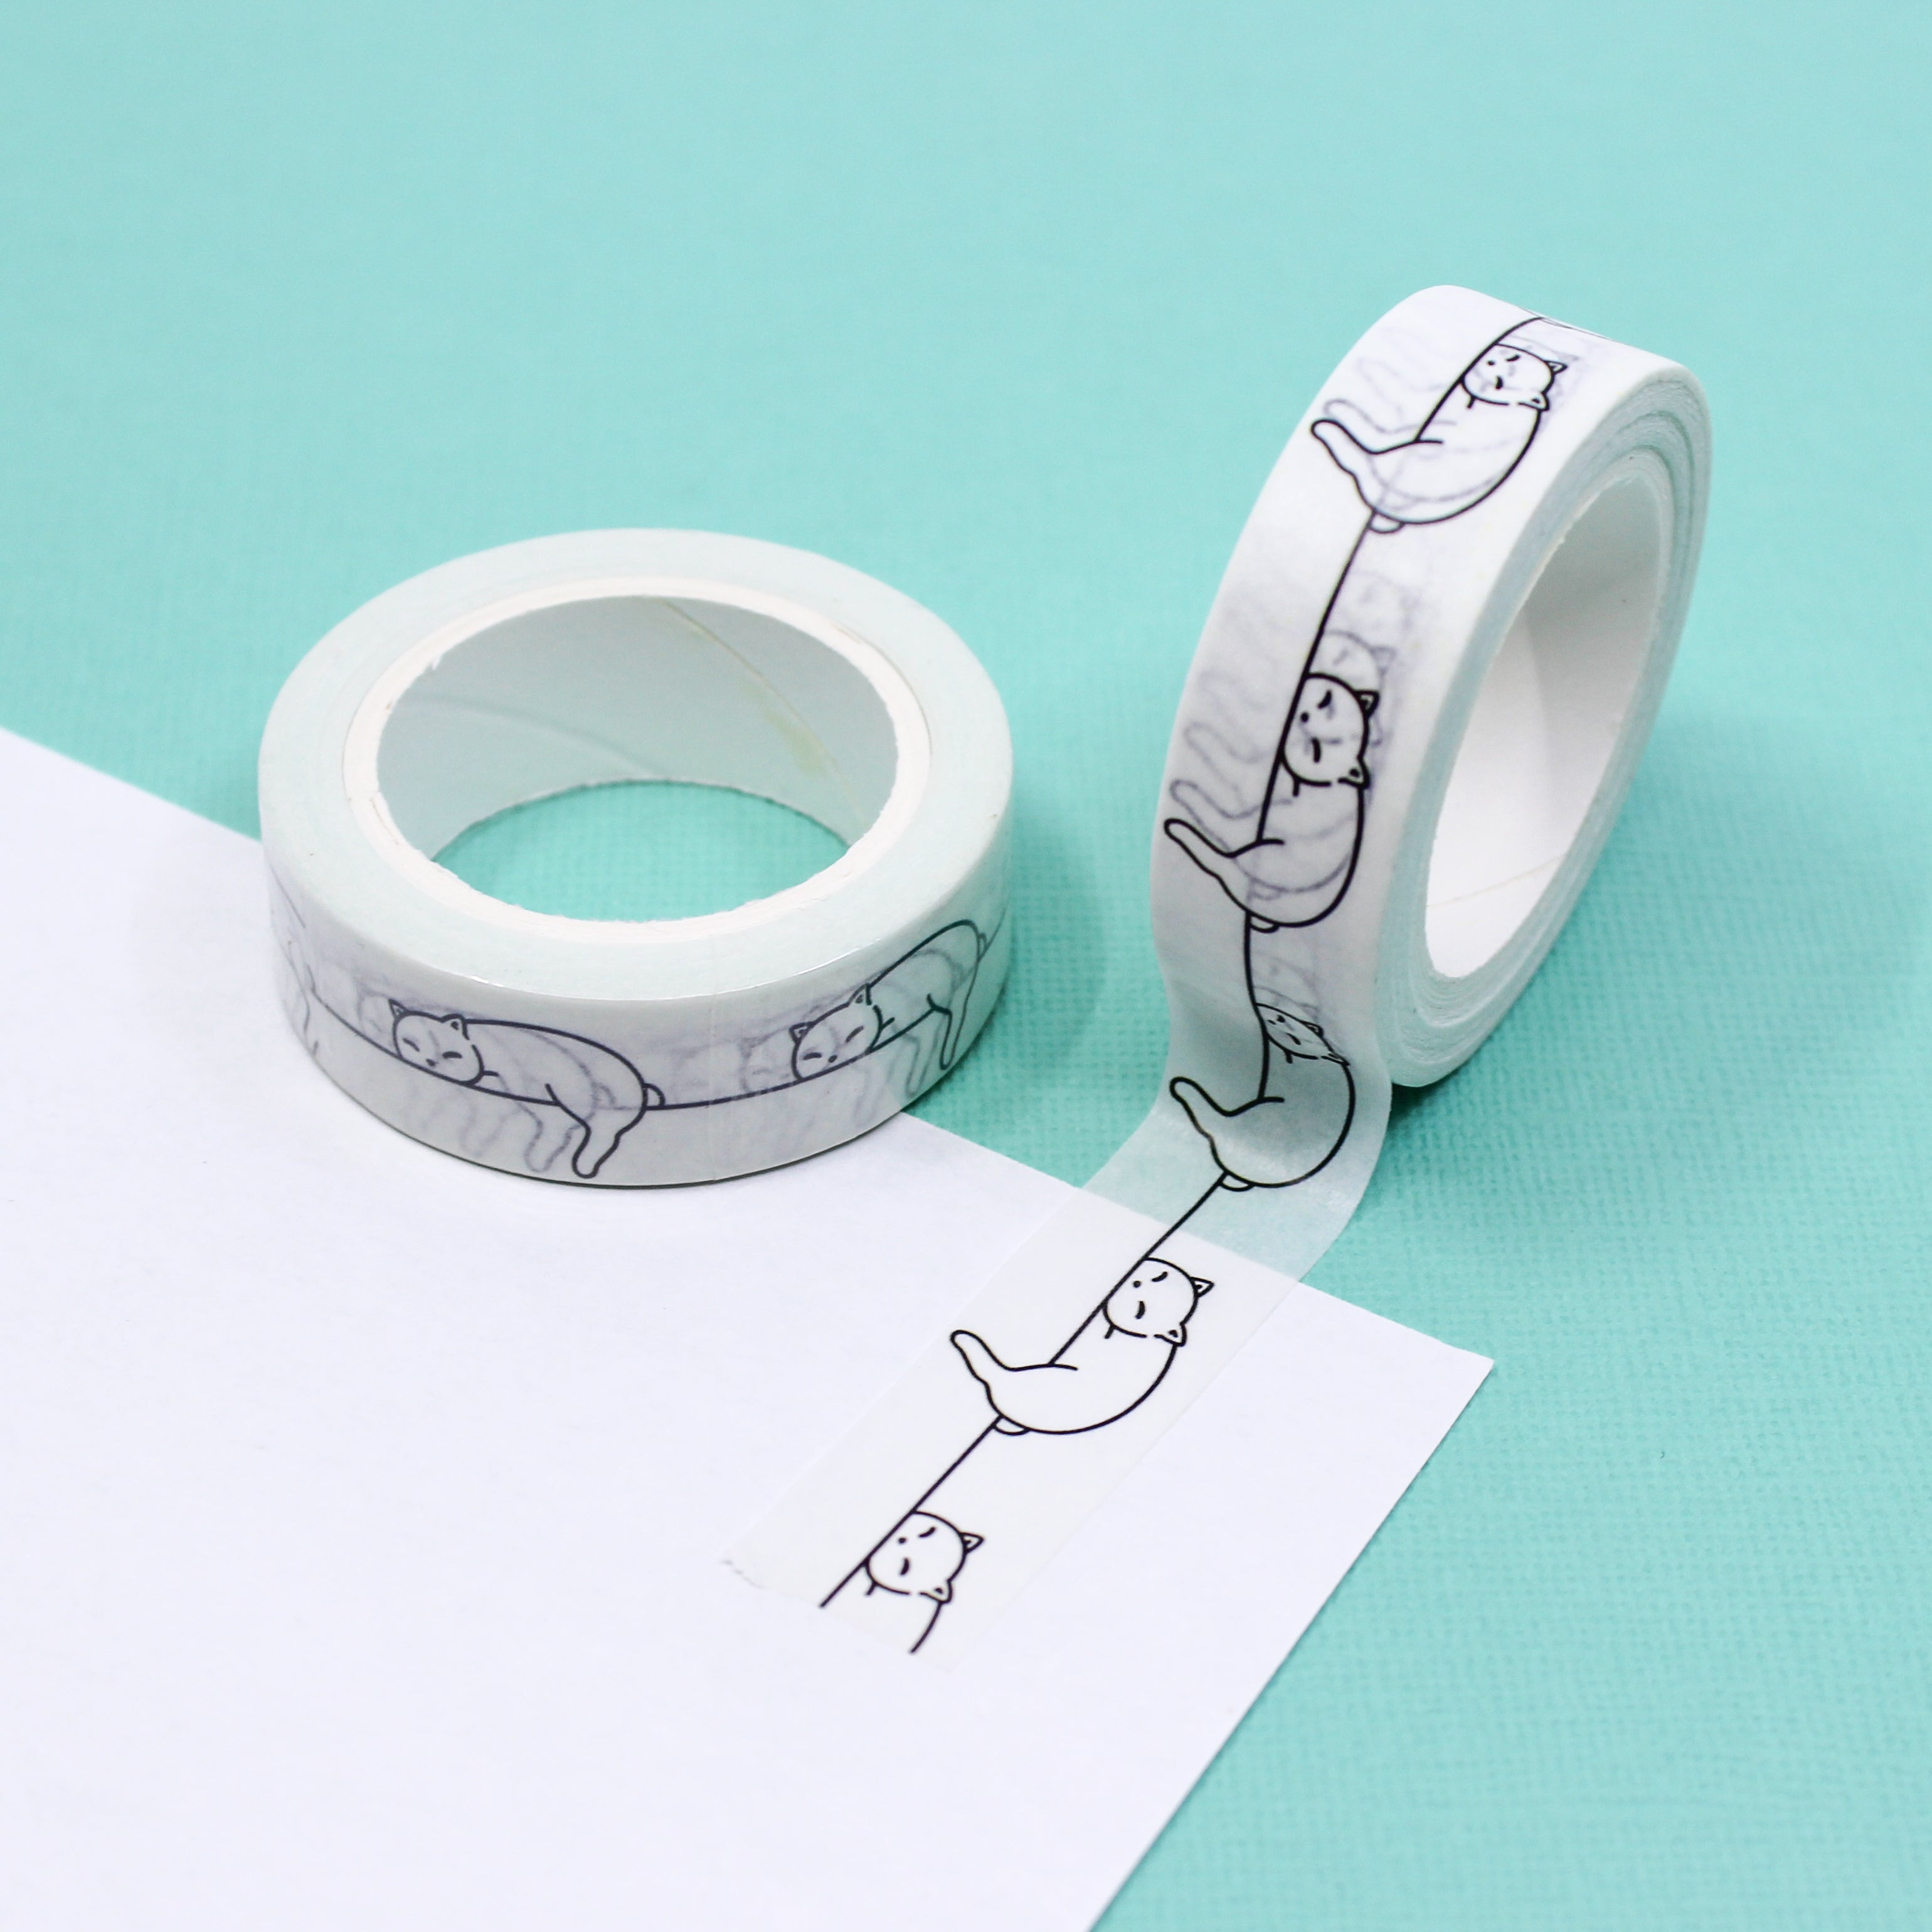 Embrace coziness and charm with our Sleeping Cat Washi Tape, featuring adorable cat illustrations. Ideal for adding a touch of feline sweetness to your projects. This tape is sold at BBB Supplies Craft Shop.